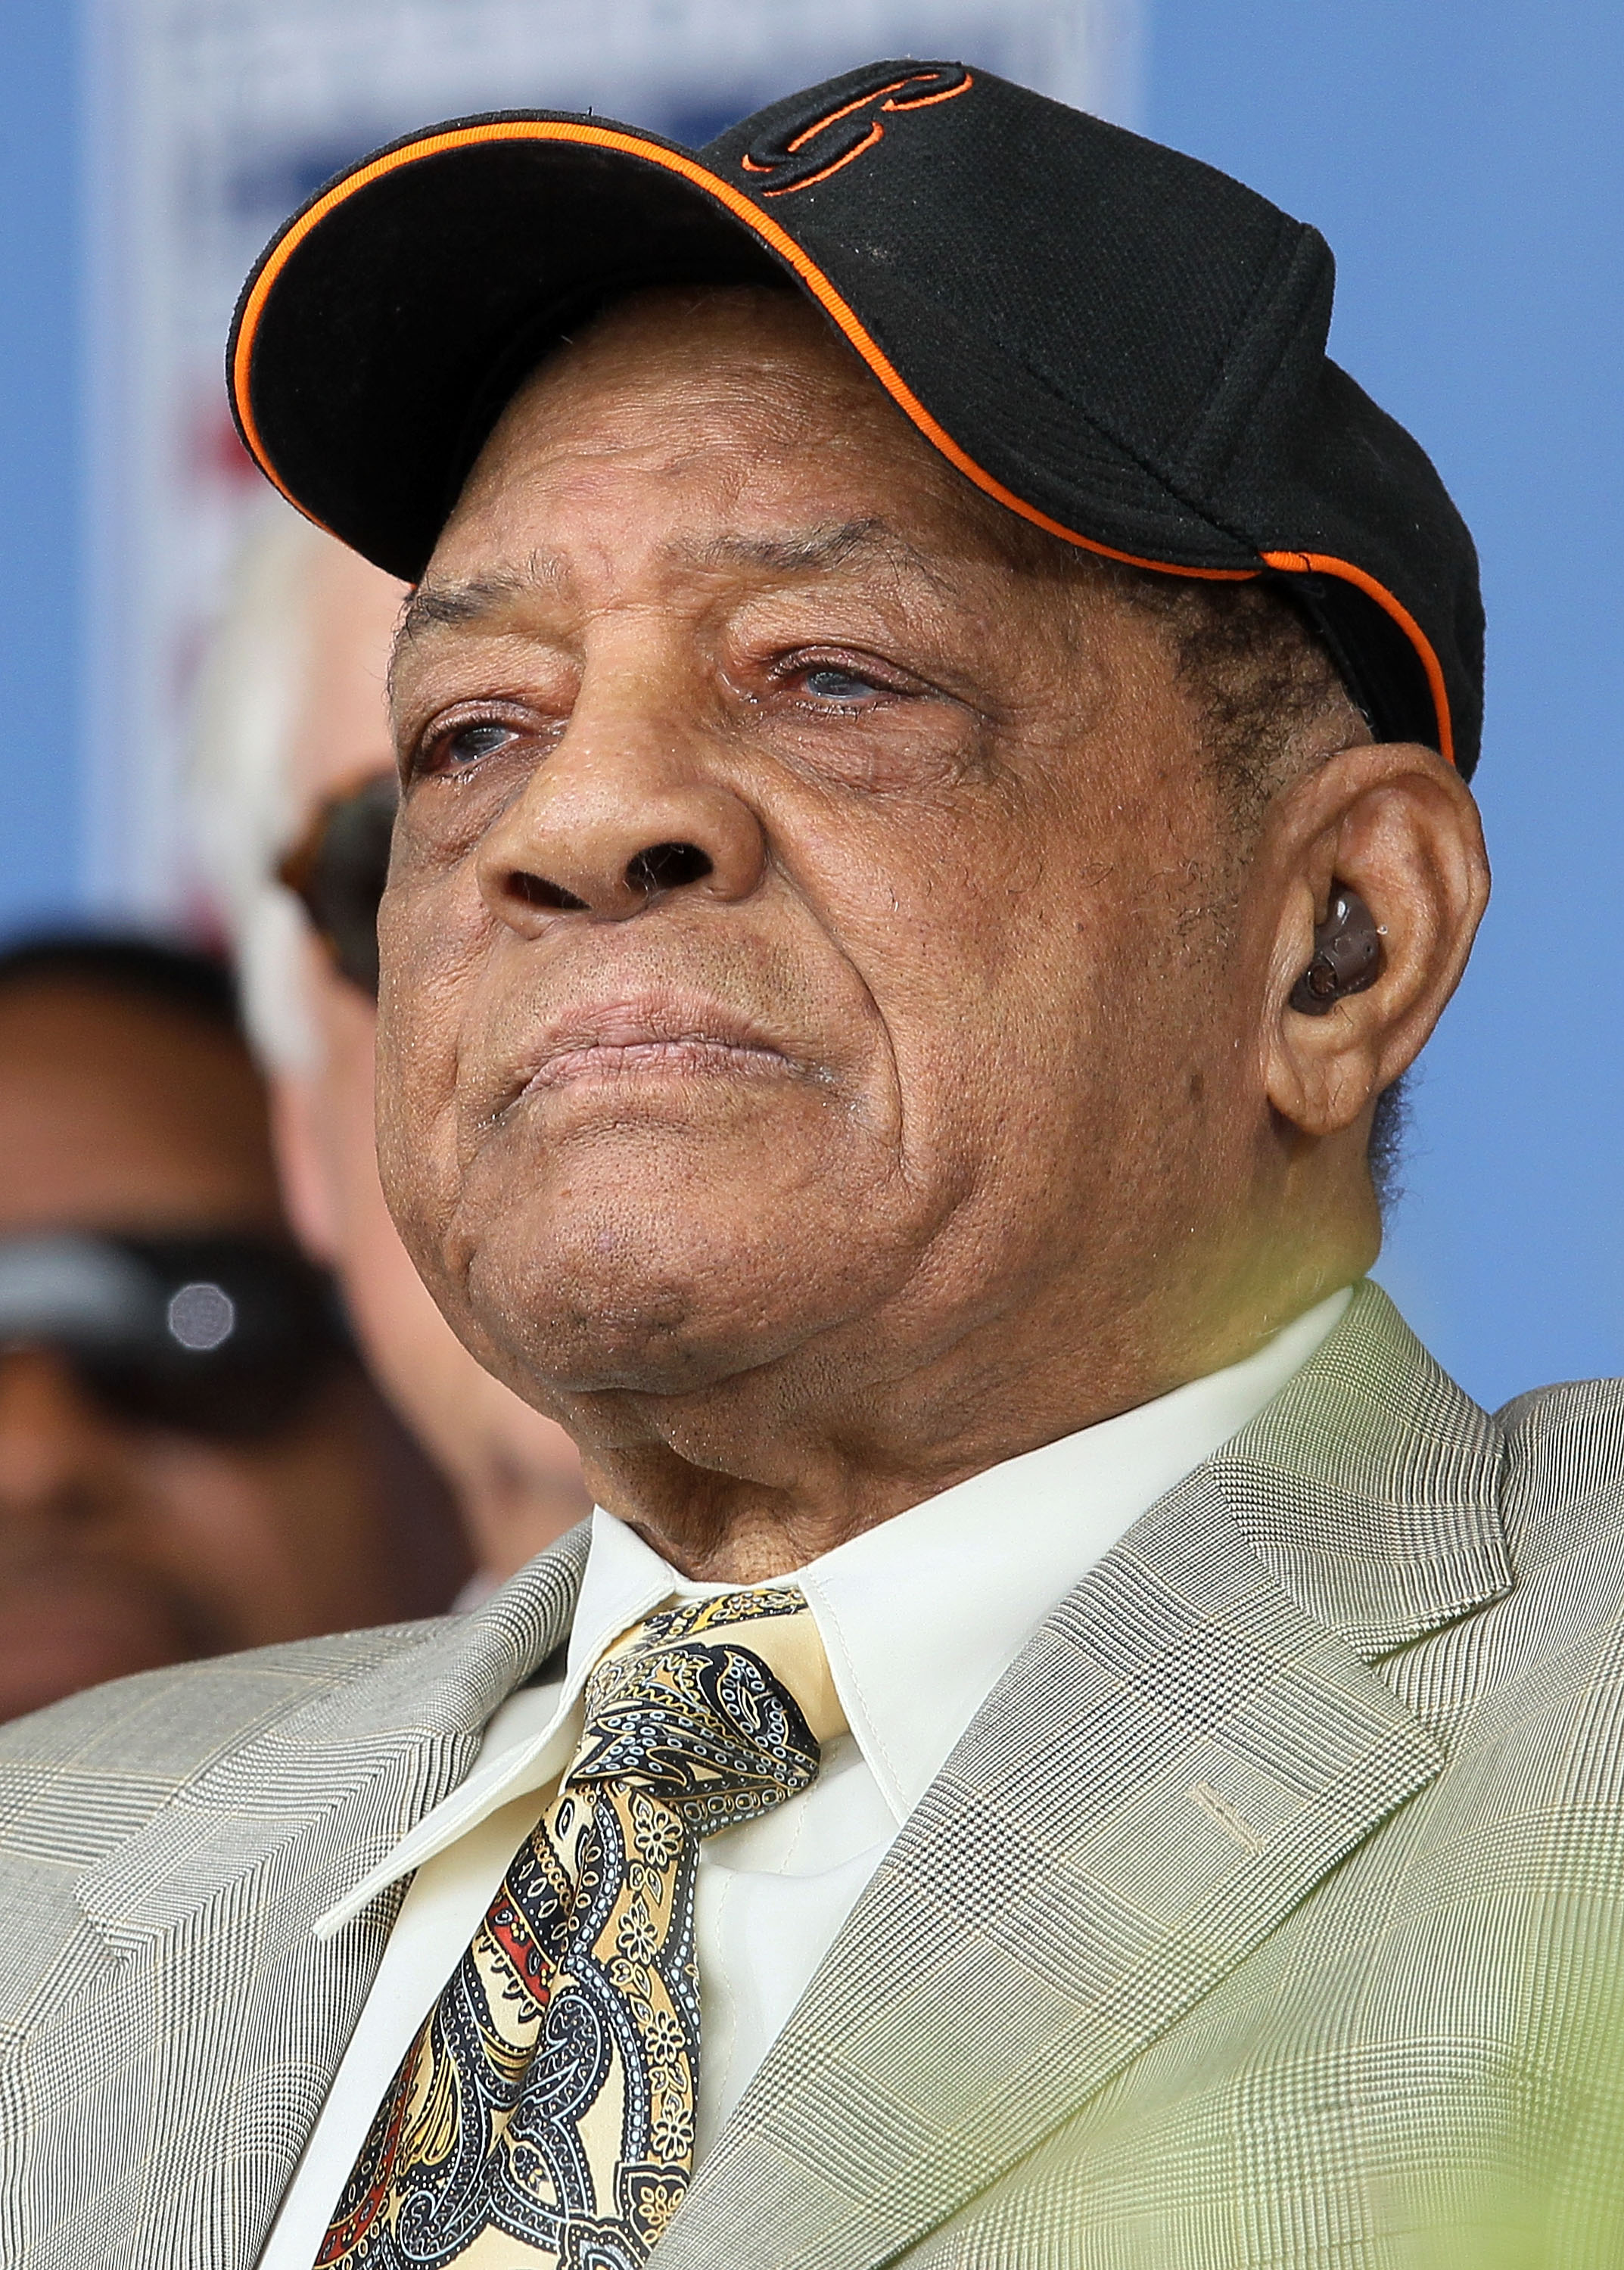 COOPERSTOWN, NY - JULY 25:  Baseball icon Willie Mays attends the Baseball Hall of Fame induction ceremony at Clark Sports Center on July 25, 20010 in Cooperstown, New York.  (Photo by Jim McIsaac/Getty Images)